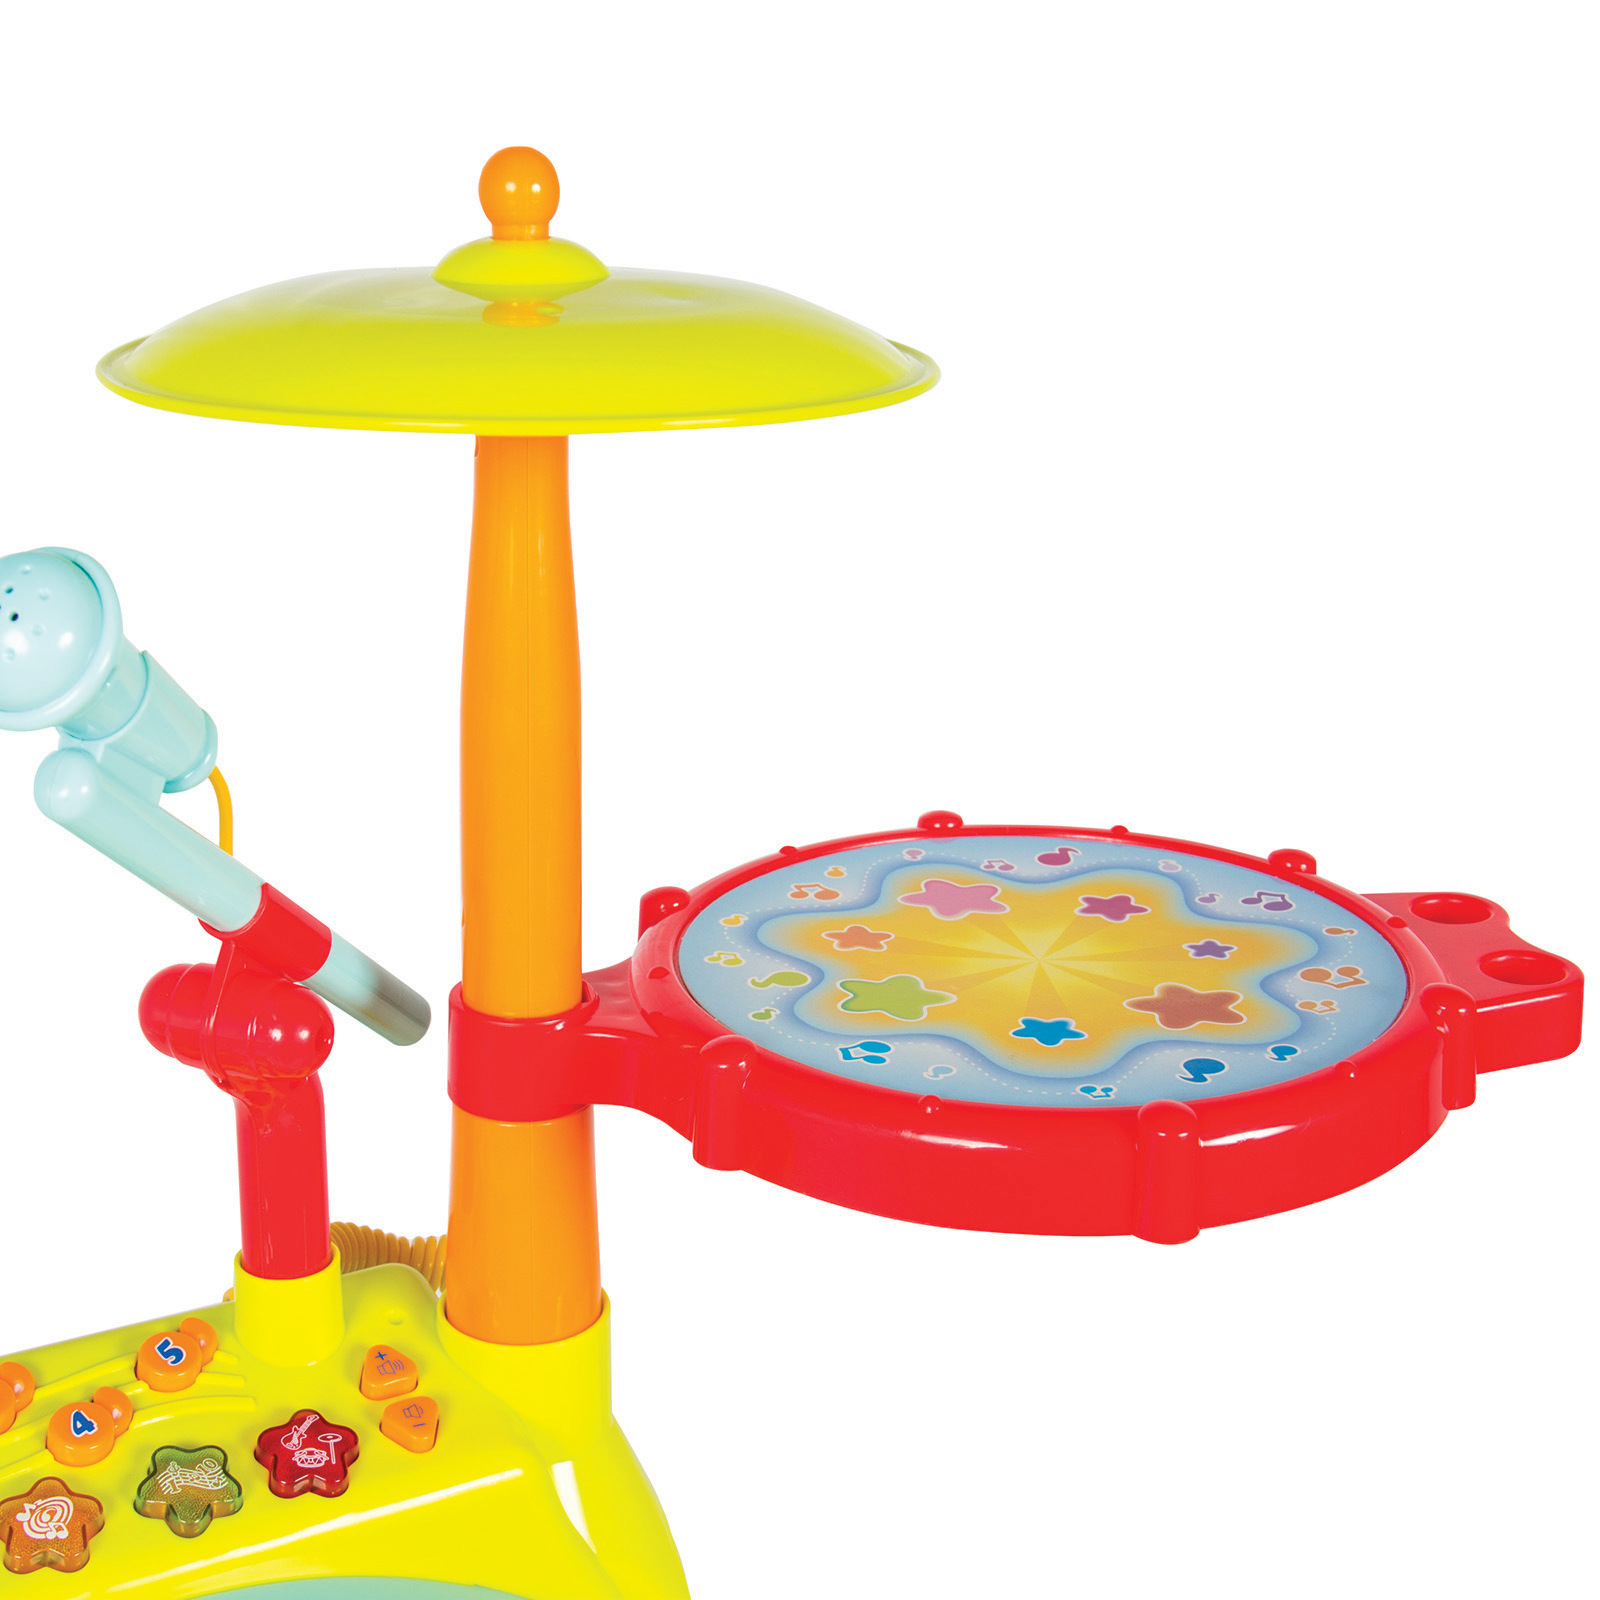 Best Choice Products Kids Electronic Toy Drum Set w/ Adjustable Sing-Along, Microphone, Stool, Drumsticks - image 5 of 8